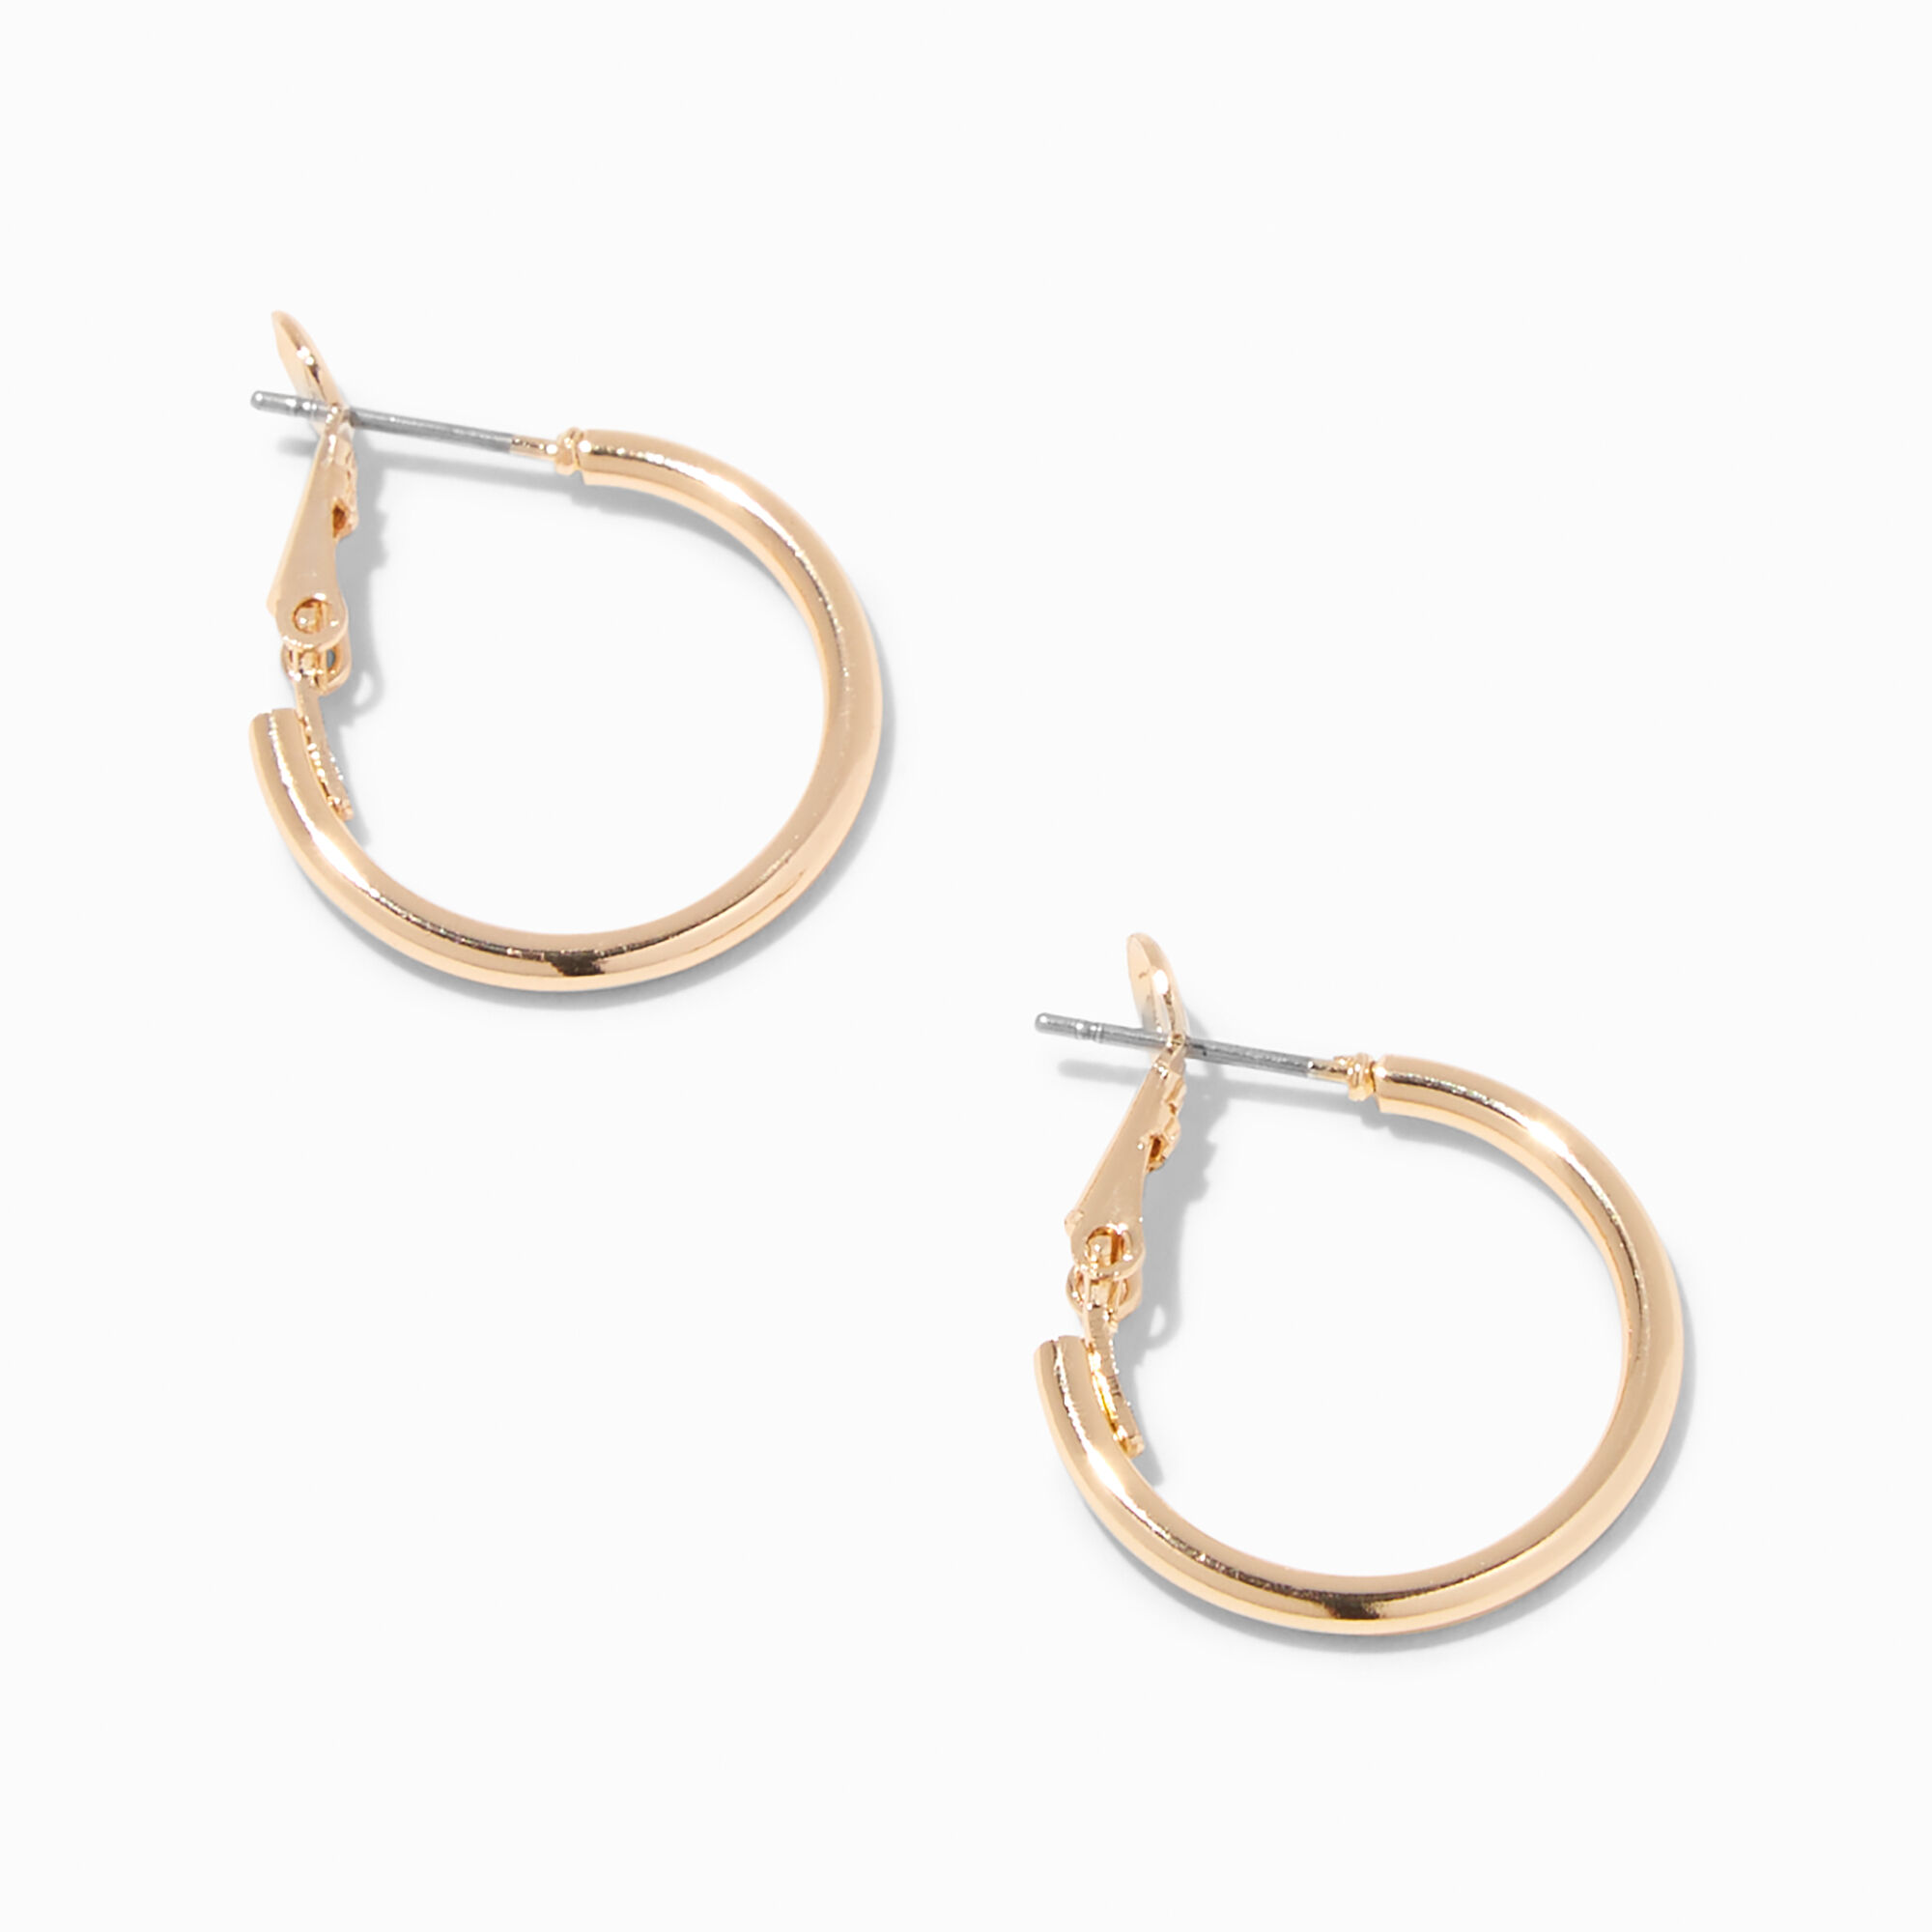 View Claires Recycled Jewelry Tone 20MM Hoop Earrings Gold information